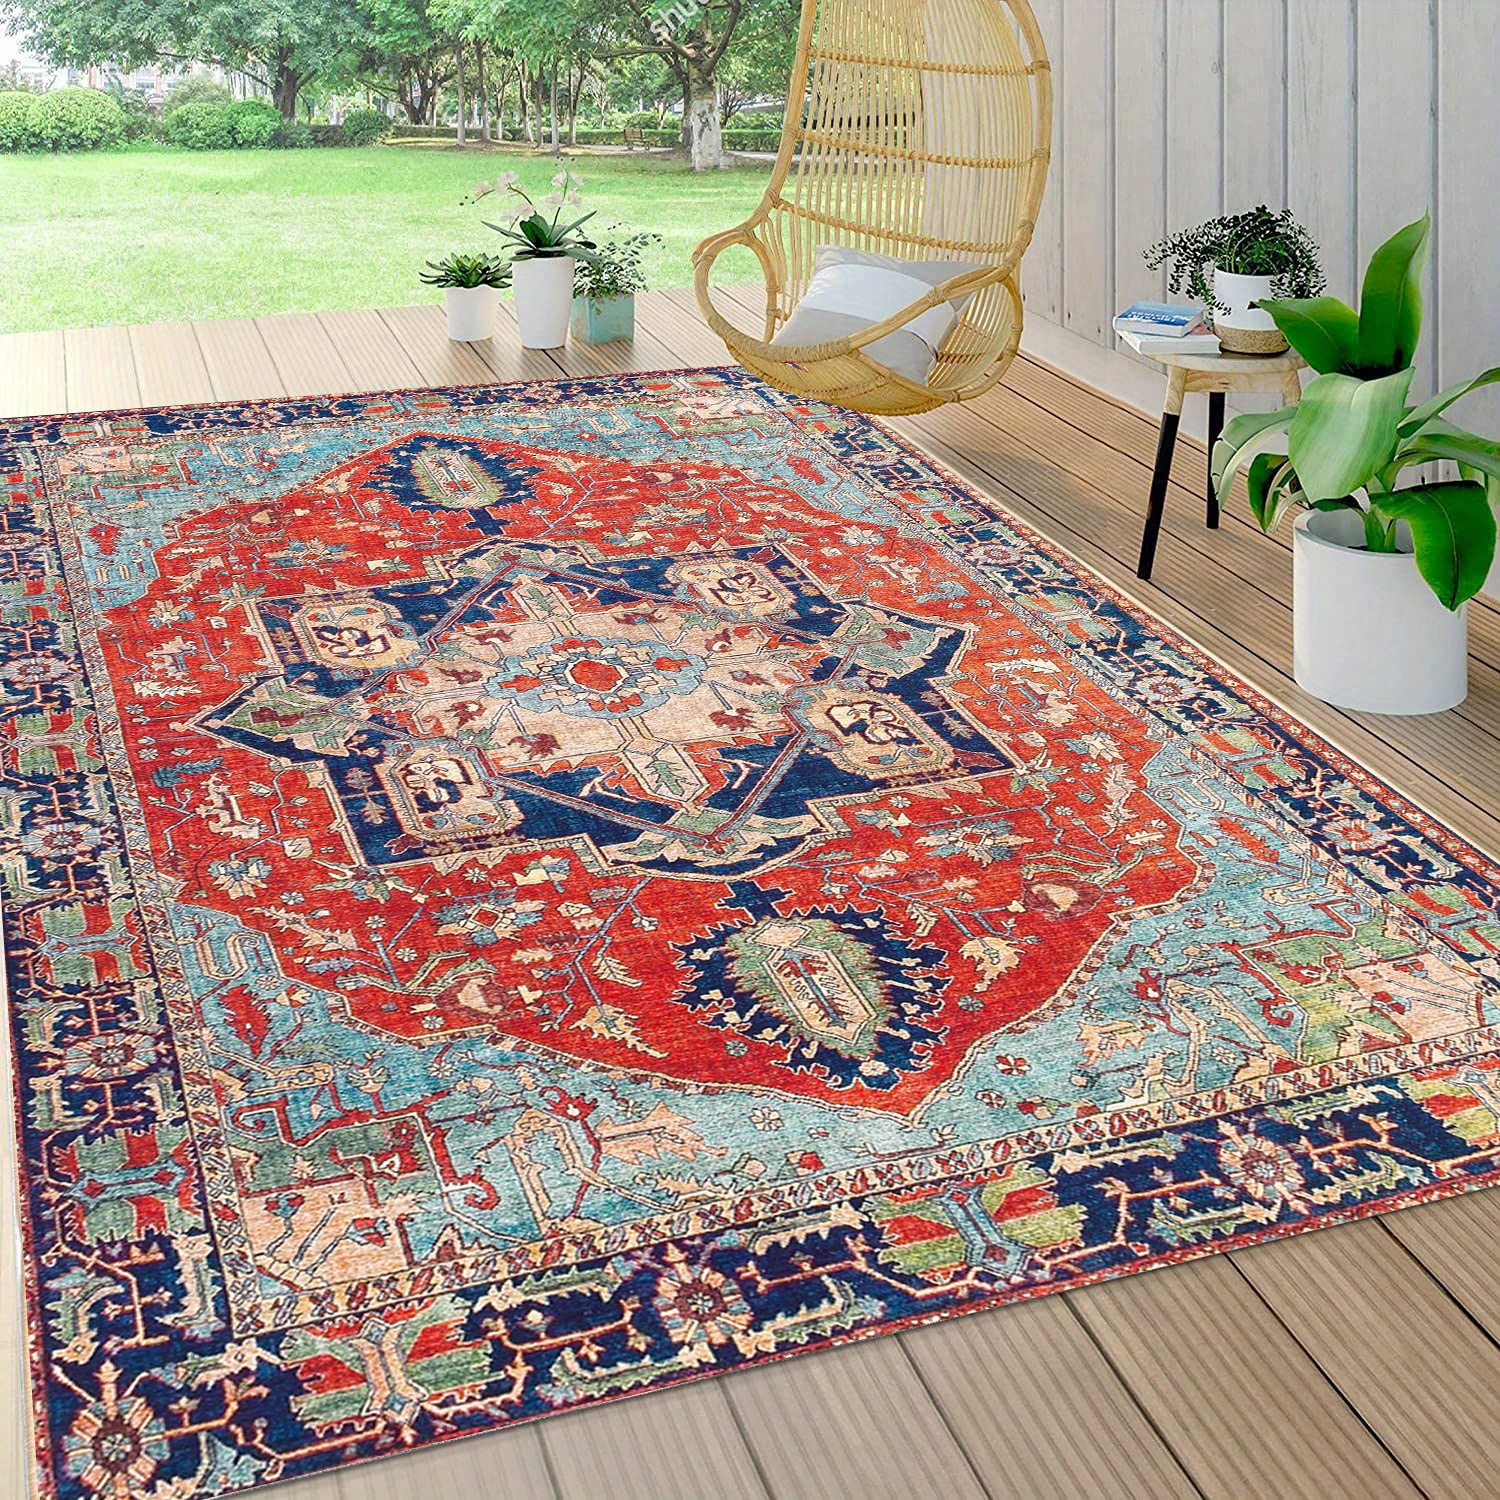 Large Outdoor Rug Mat, Outdoor Rugs For Patios Carpet Camping Rugs